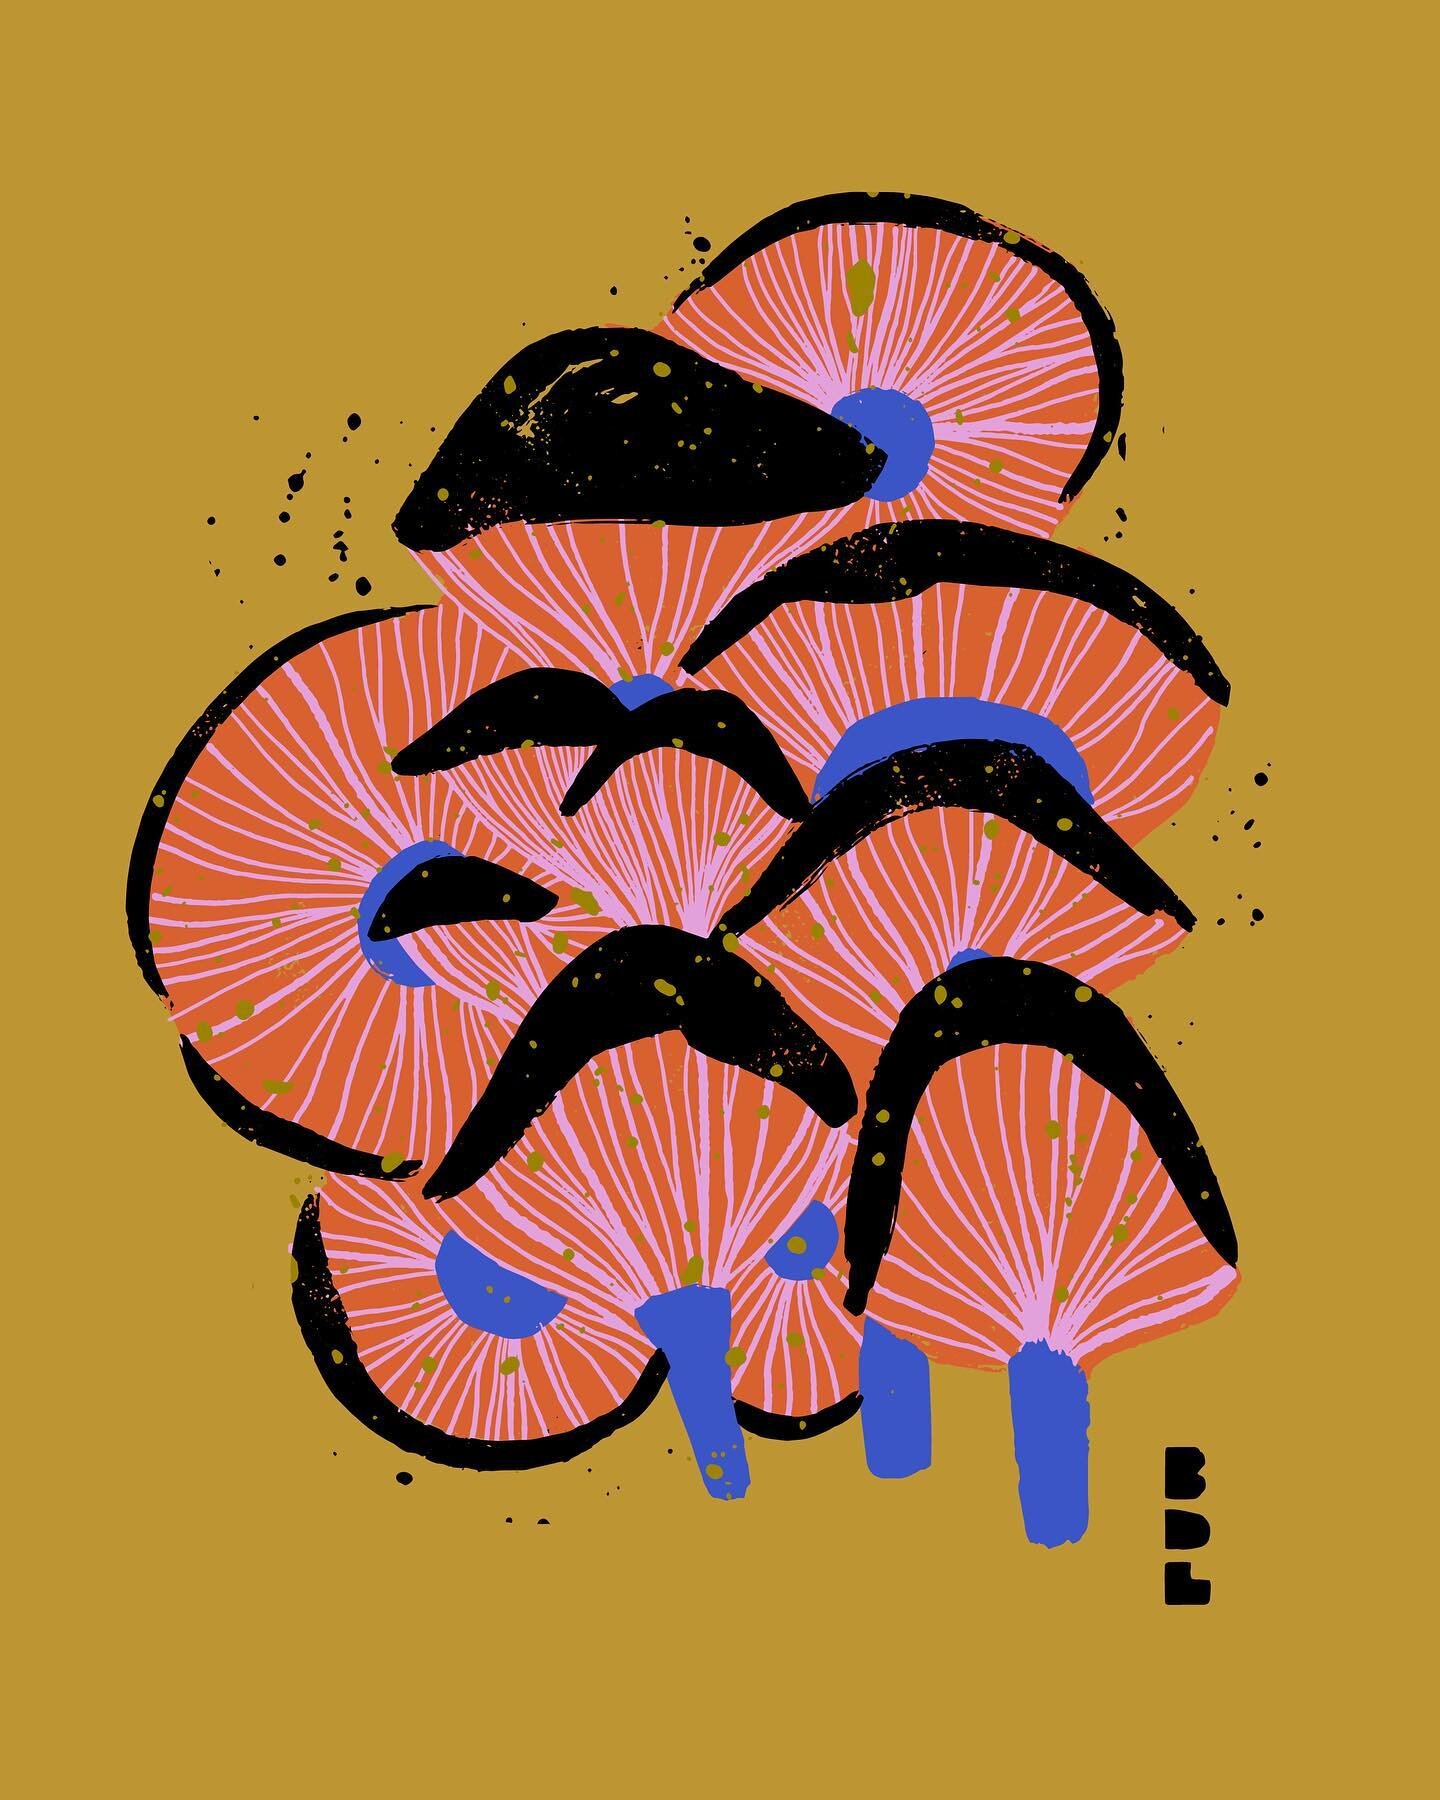 Mushrooms FIVE WAYS ✨
What&rsquo;s your favorite? 
🍄🌈
I&rsquo;m taking a surface design class and relearning the ins and outs of illustrator. I used the recolor artwork tool to help come up with all these combinations 🤗 

Artwork was created in 
p